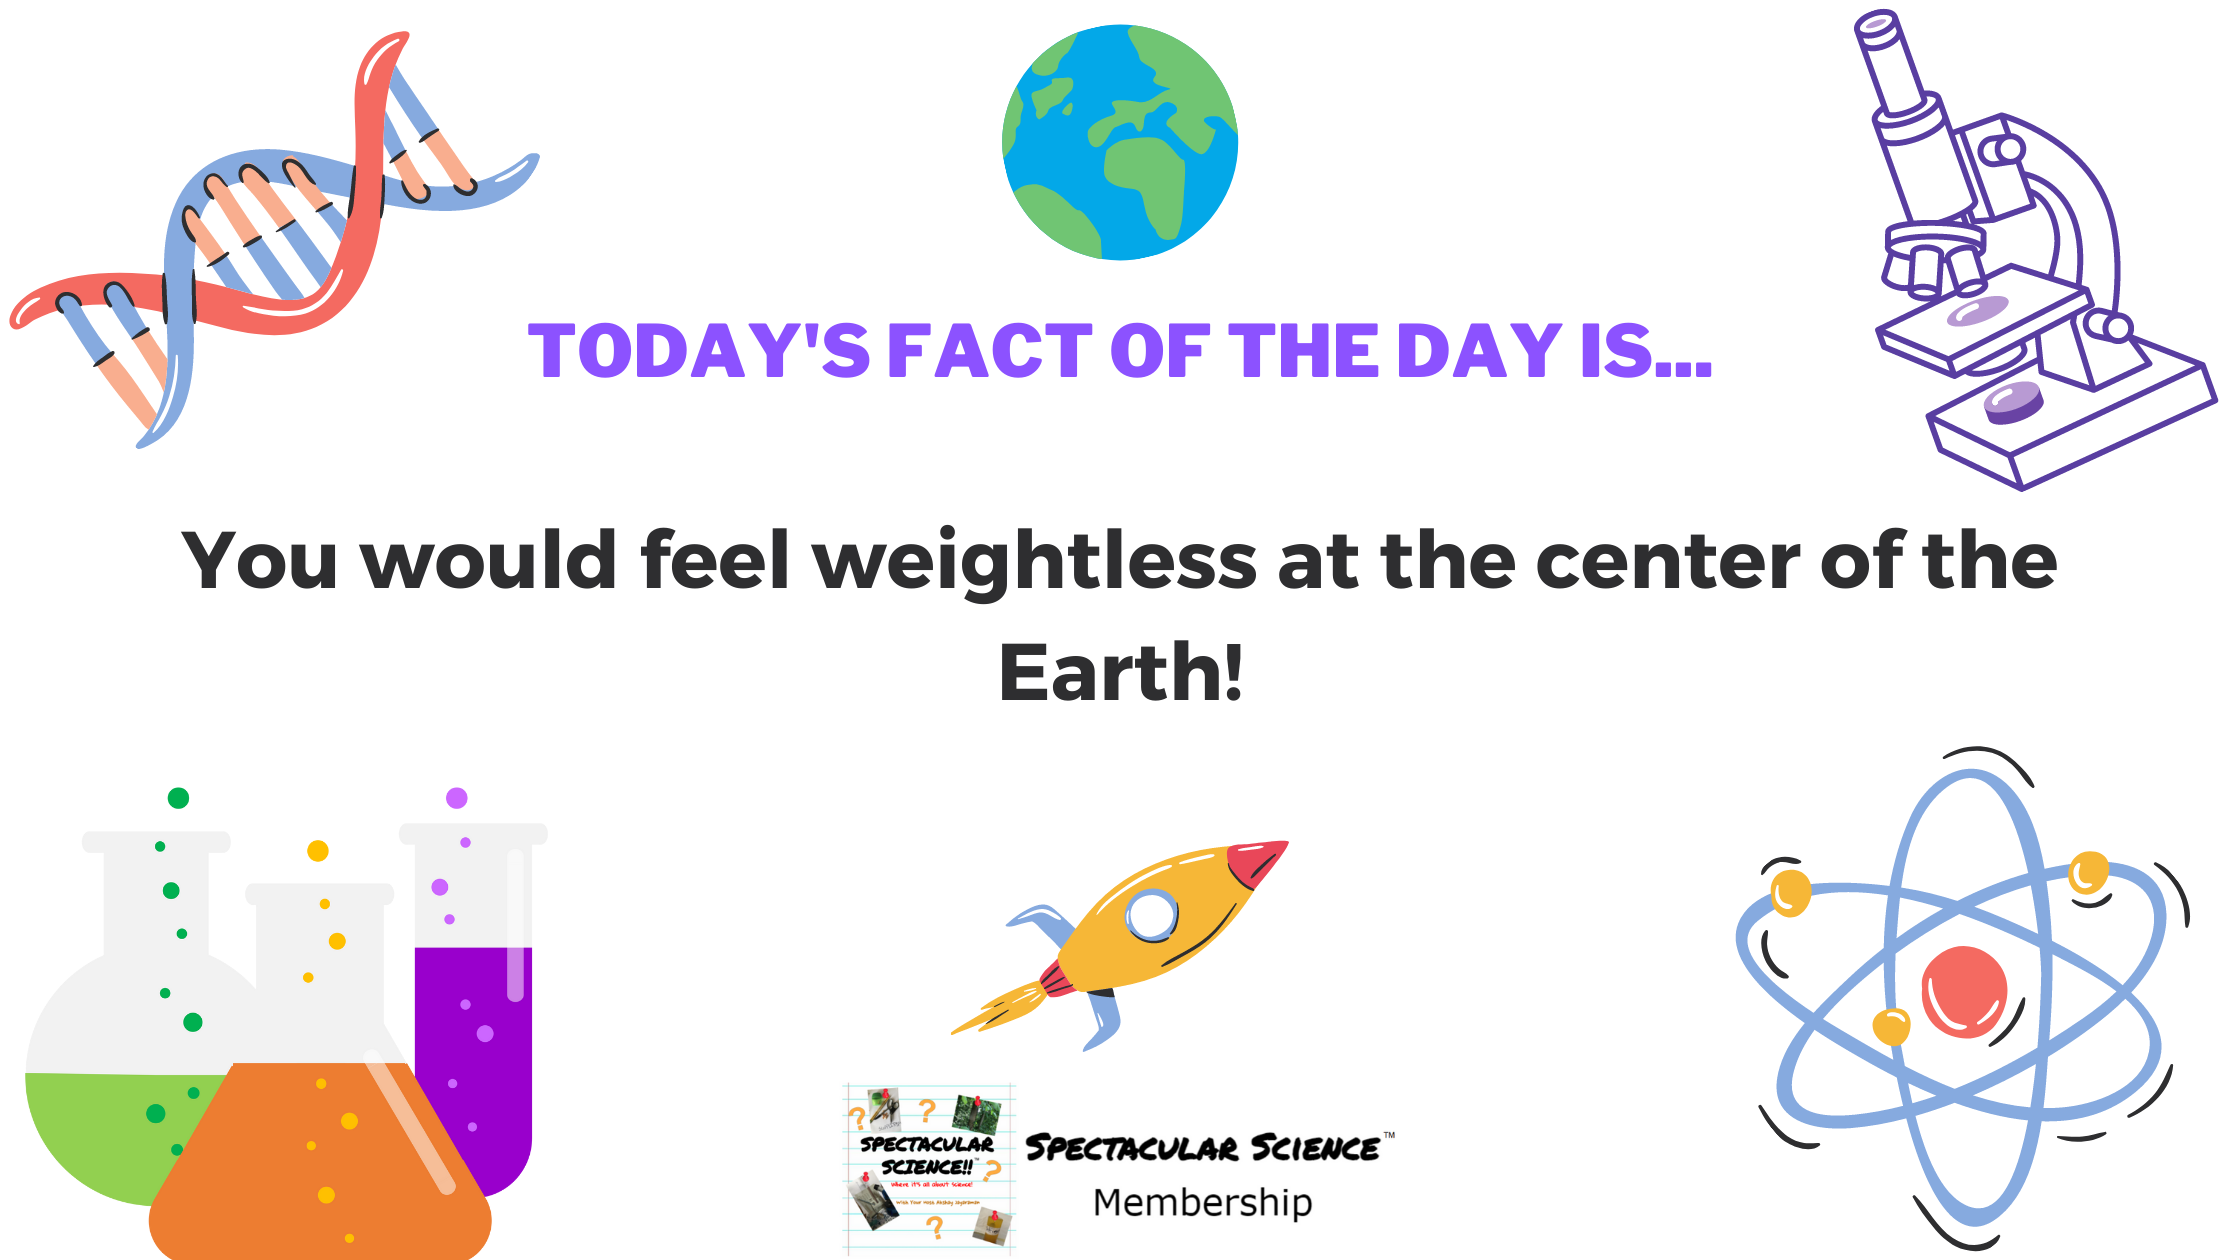 Fact of the Day Image Apr. 27th